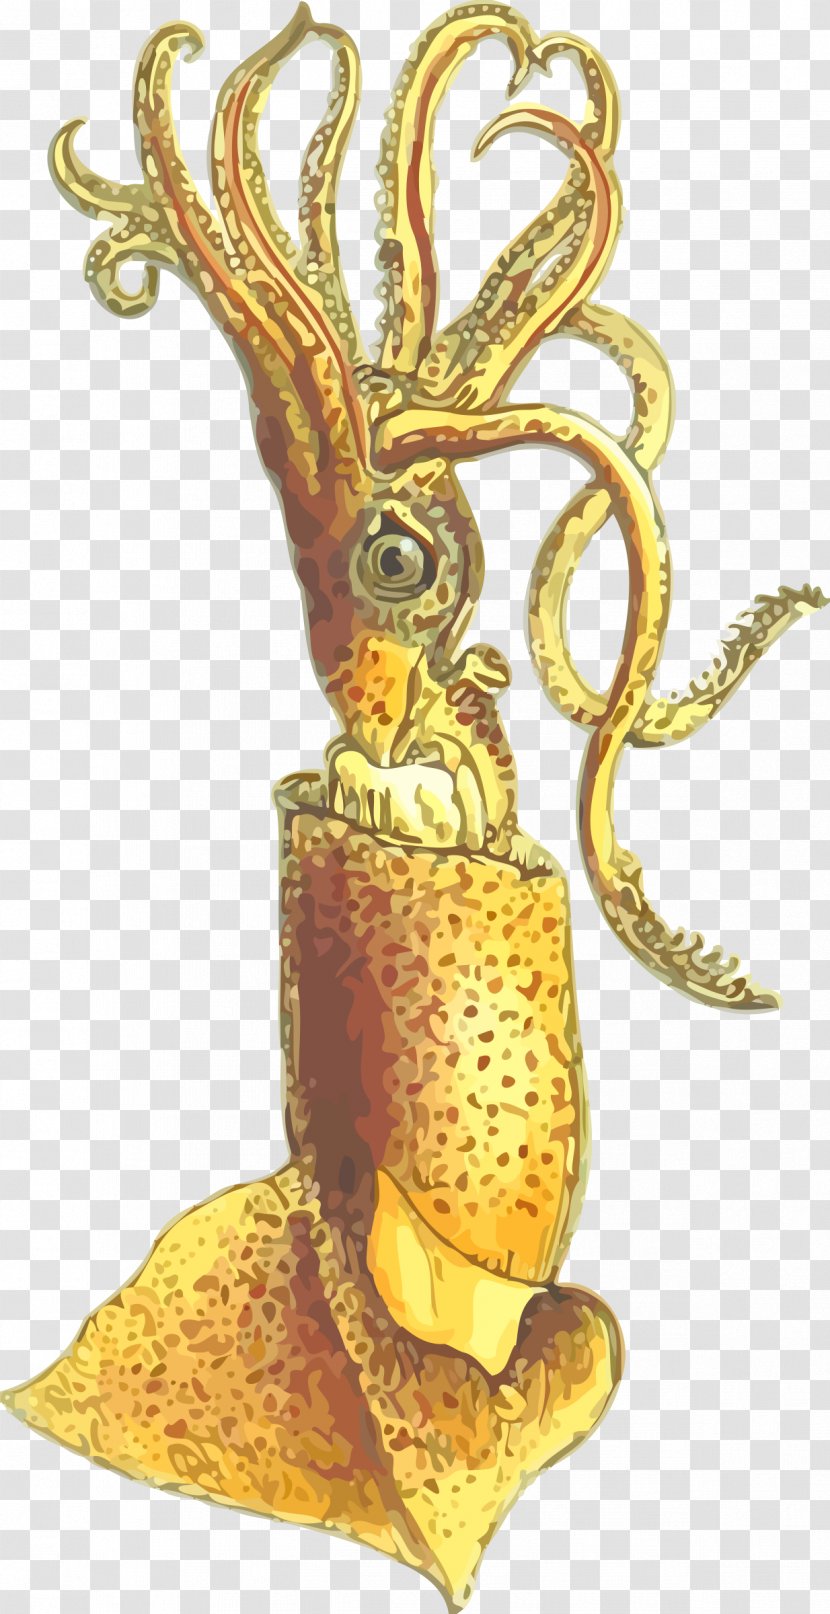 Squid Cephalopod Clip Art - Gold - Illustrations Transparent PNG